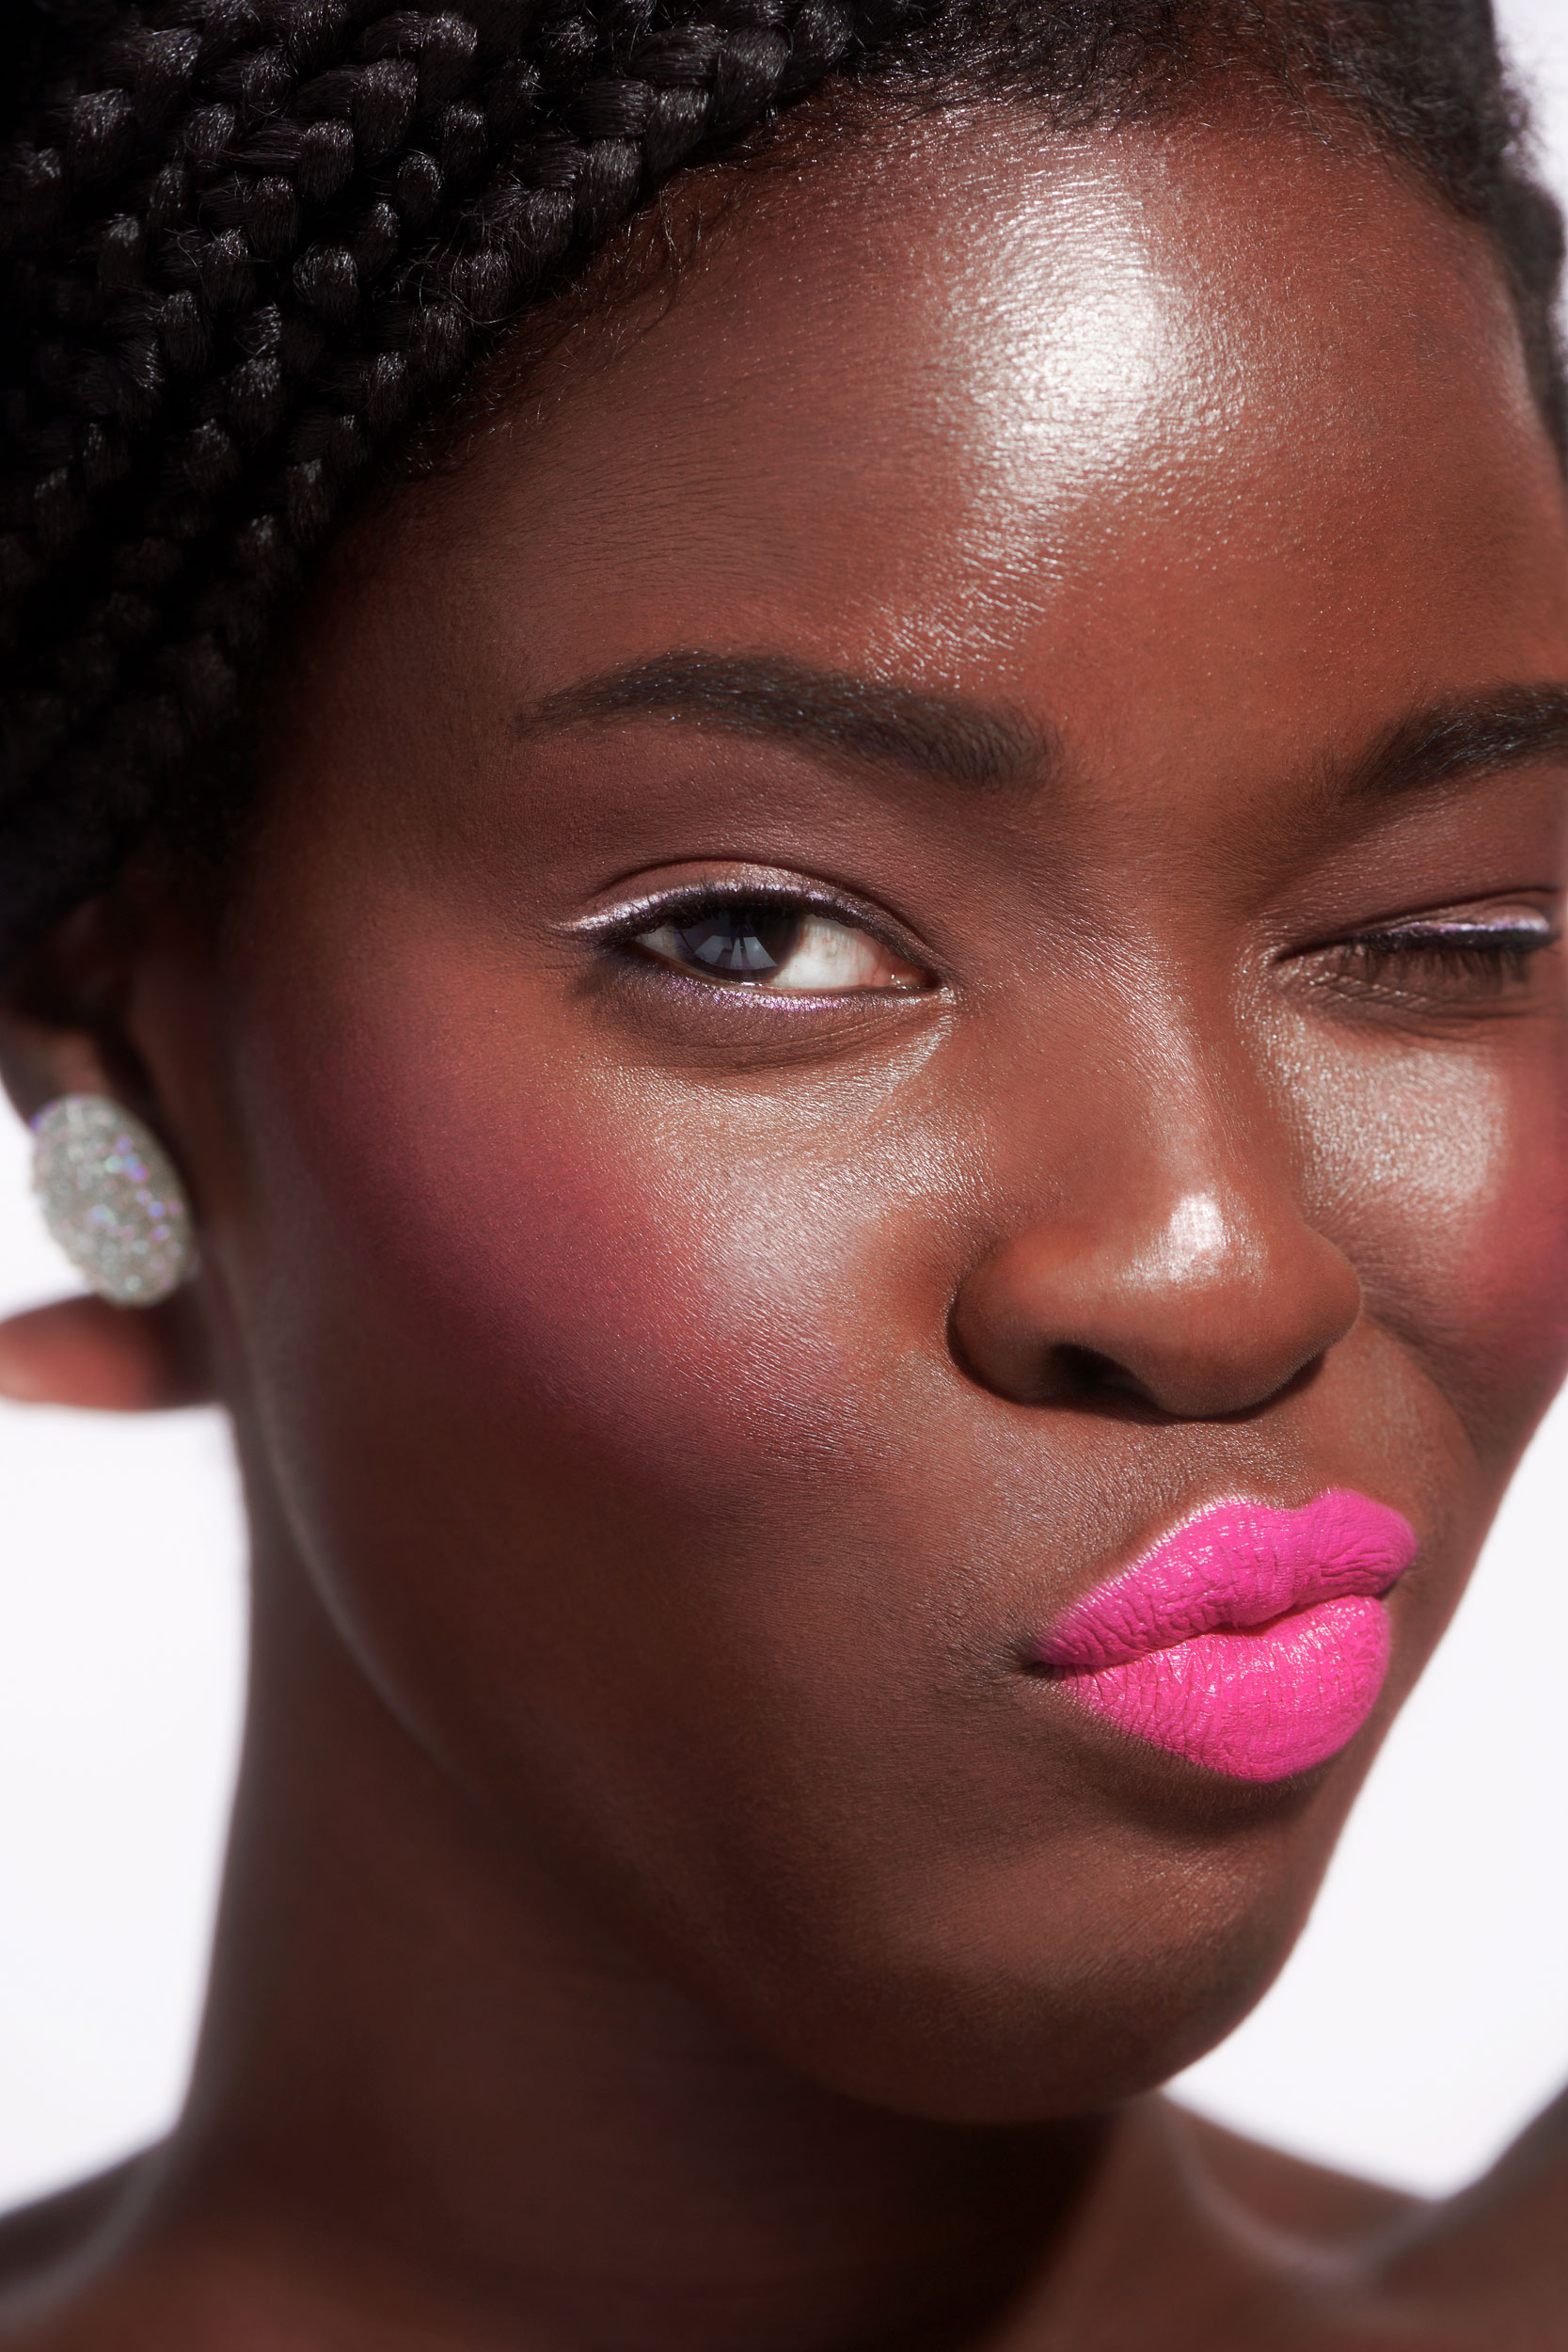 Tight portrait of Black female model with white eyeliner and bright pink lipstick